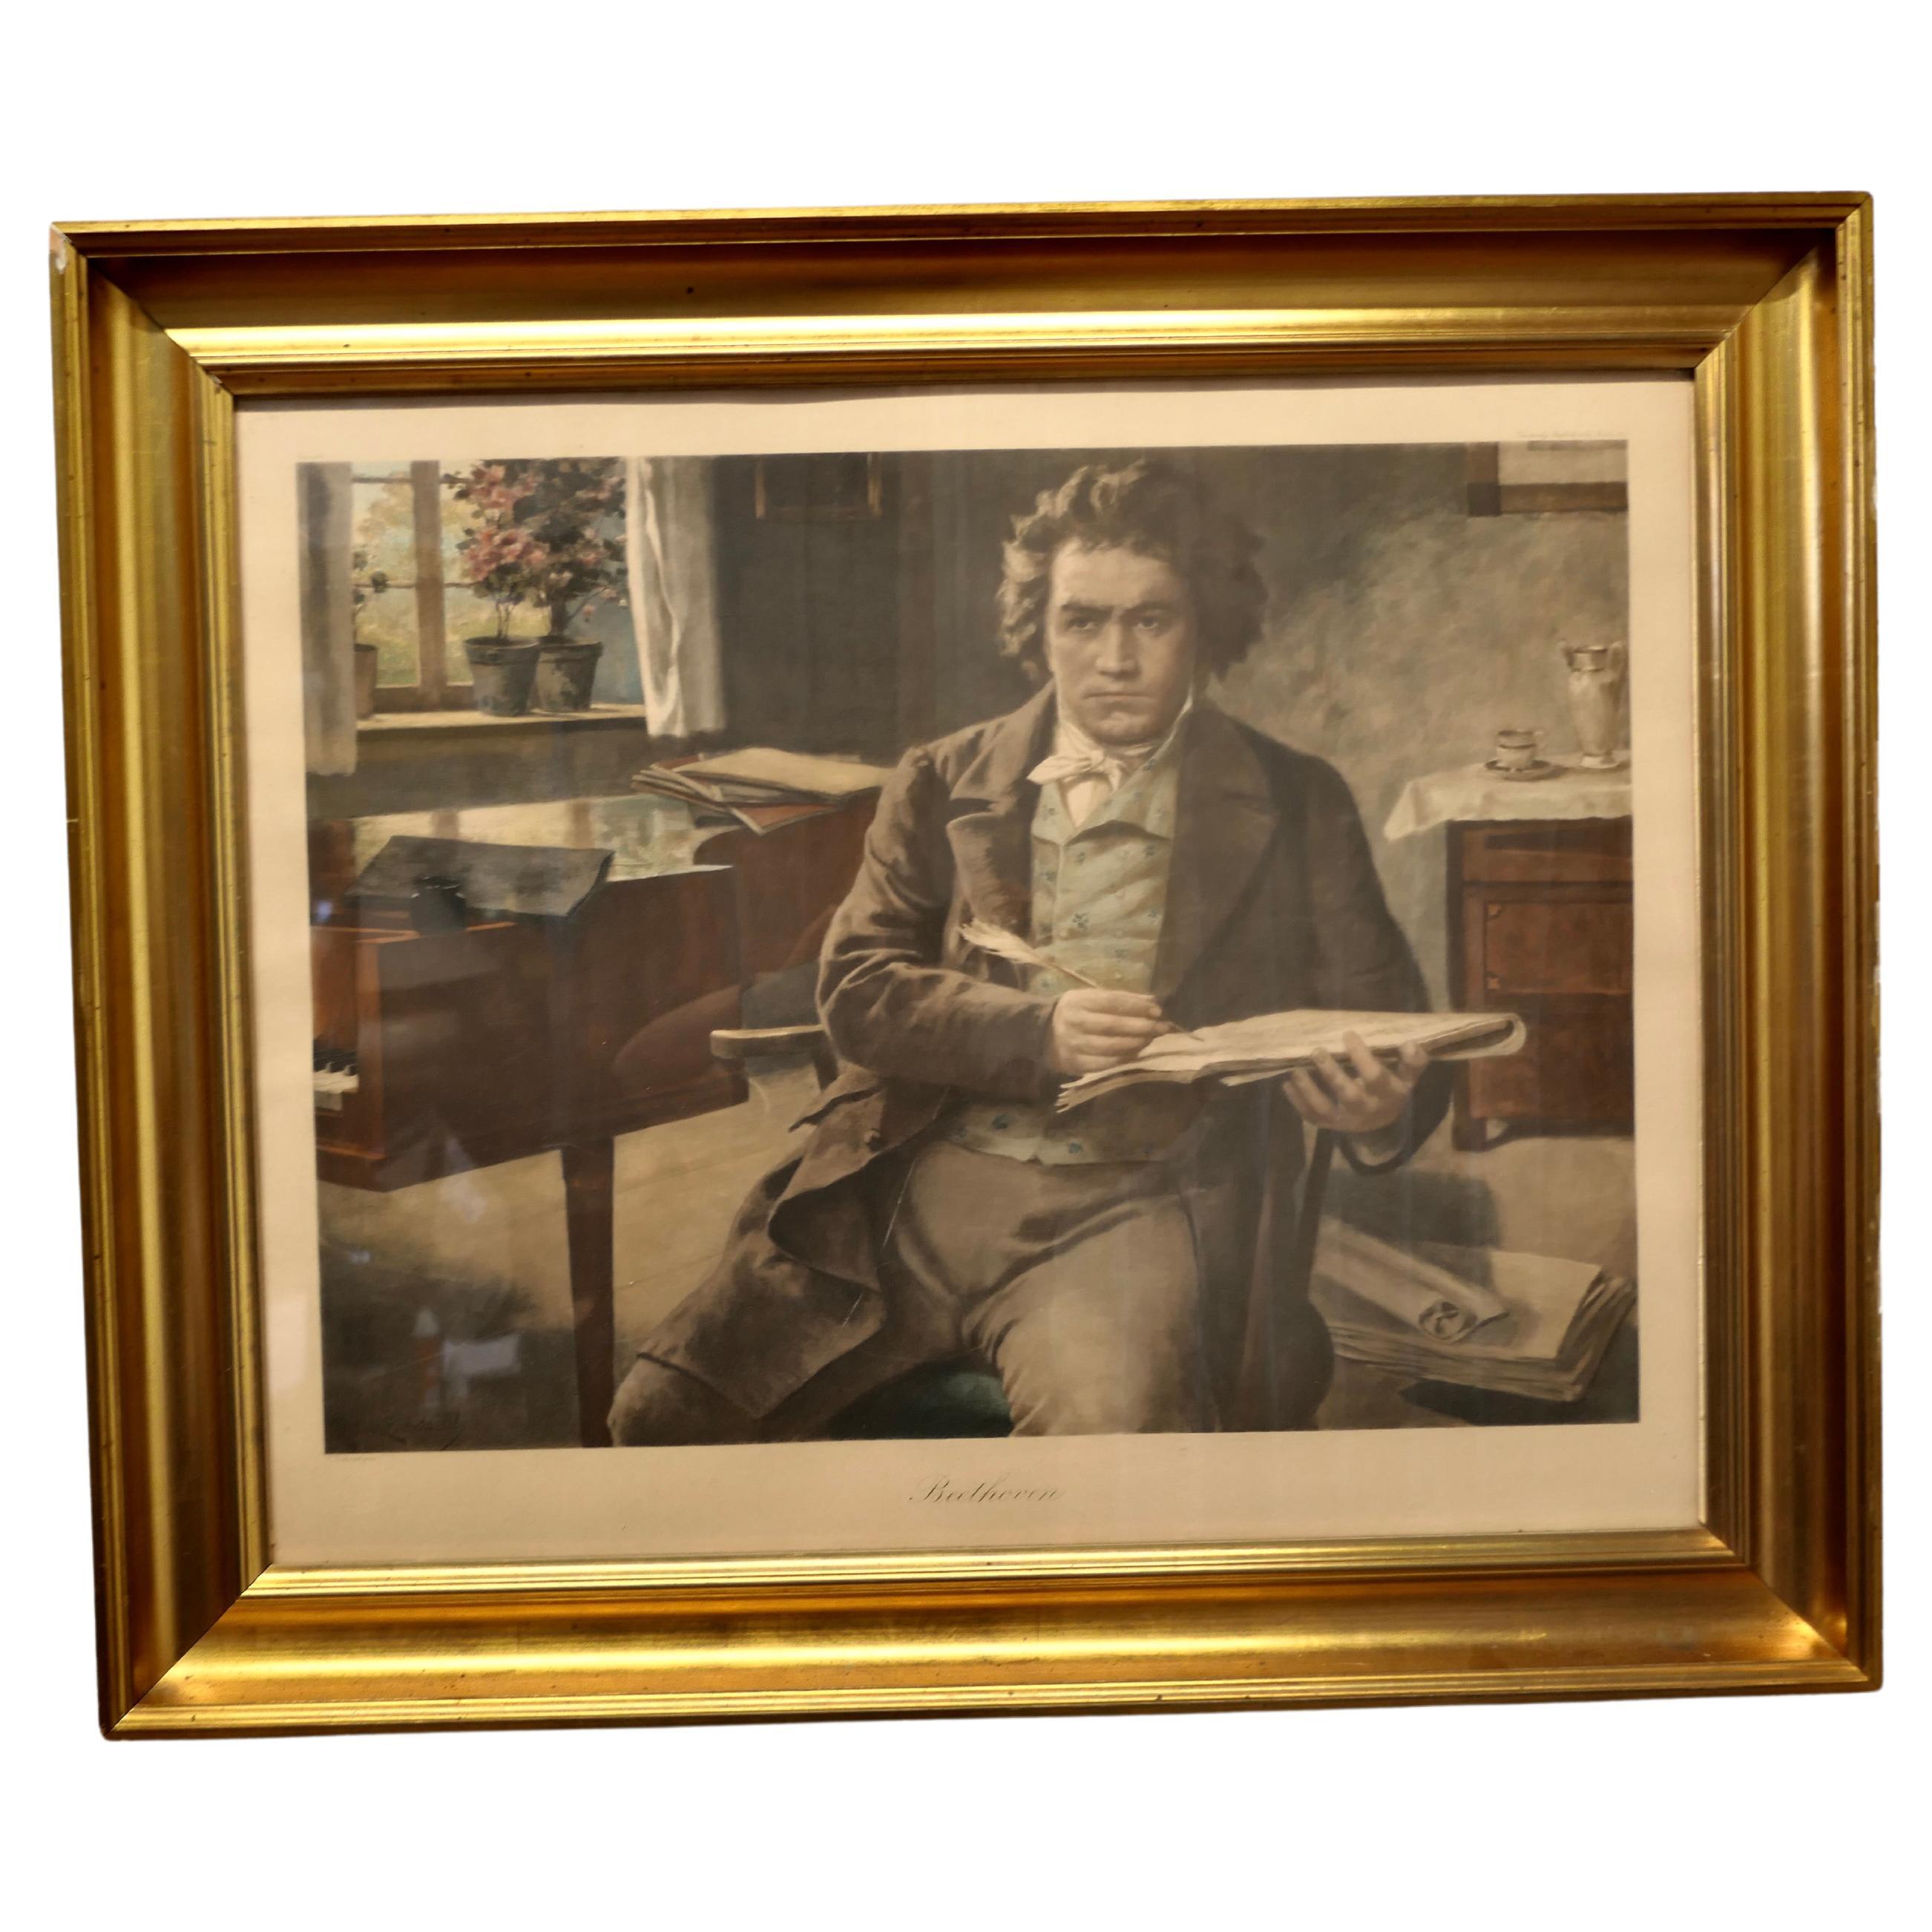  19th Century Framed Print of Beethoven   A portrait of Beethoven  